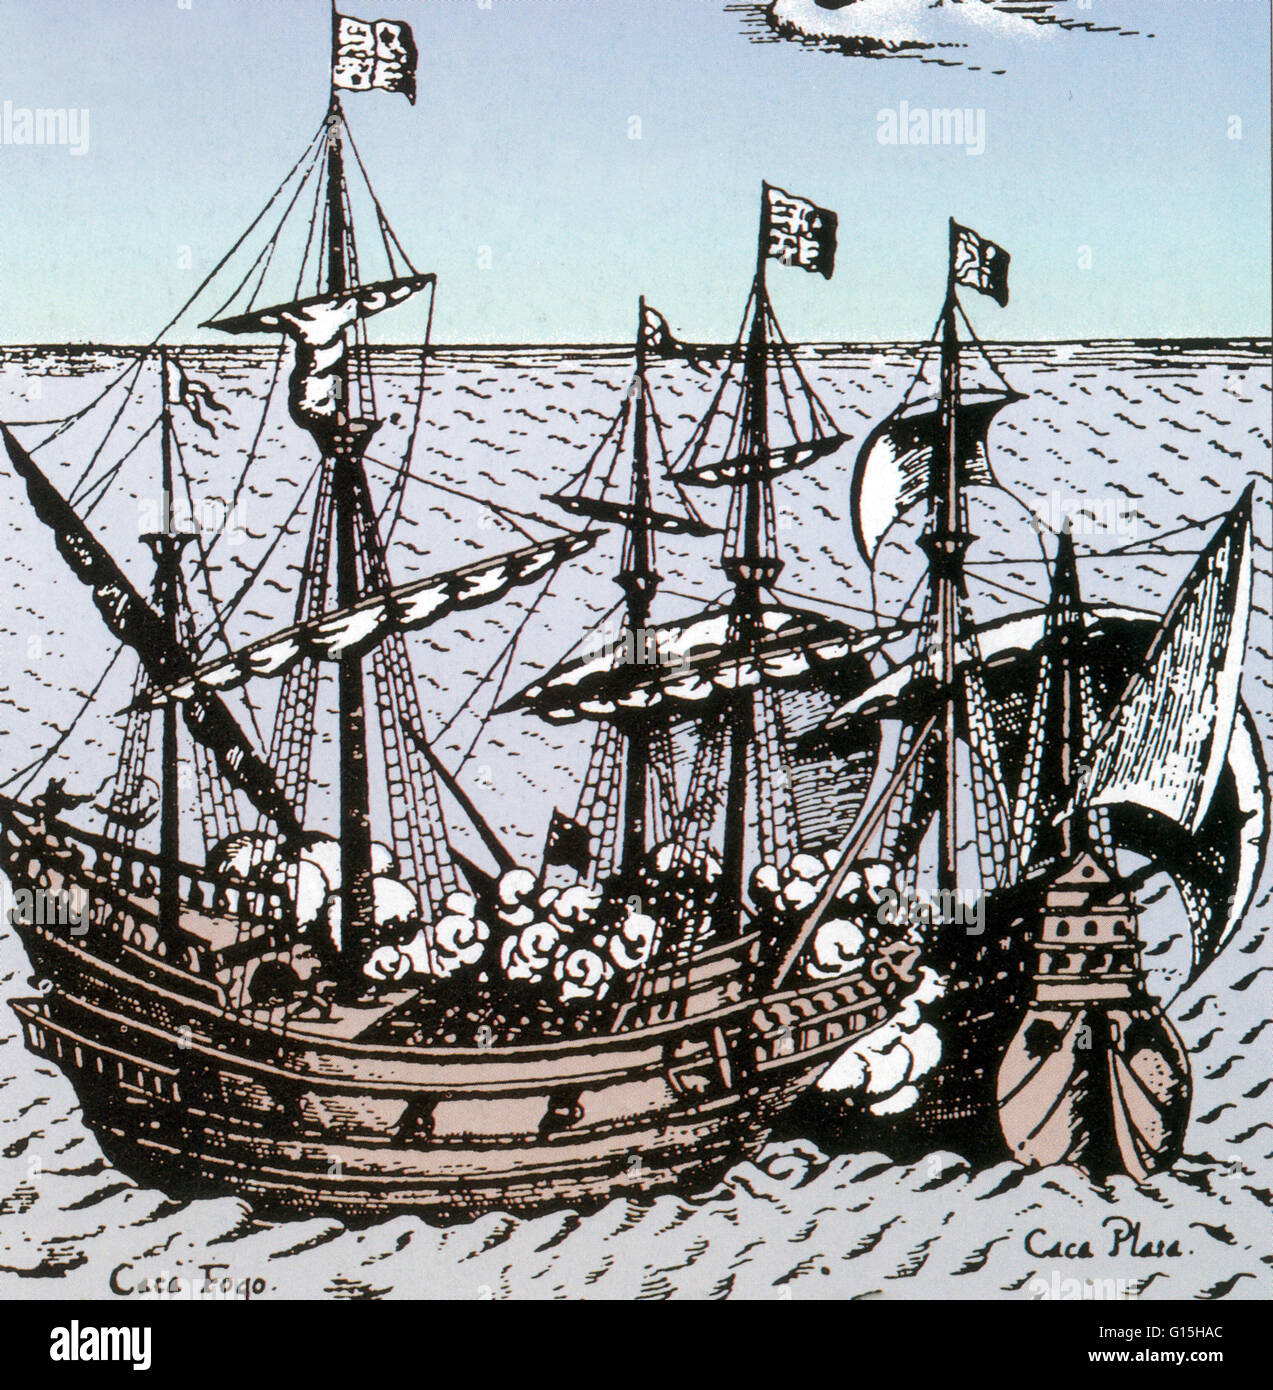 Capture Of Cacafuego, engraving by Friedrich Hulsius, 1626. The Spanish galleon Nuestra Senora de la Concepcion (Our Lady of the Immaculate Conception) was a 120 ton vessel that sailed the Peru - Panama route during the 16th century. This ship has earned Stock Photo